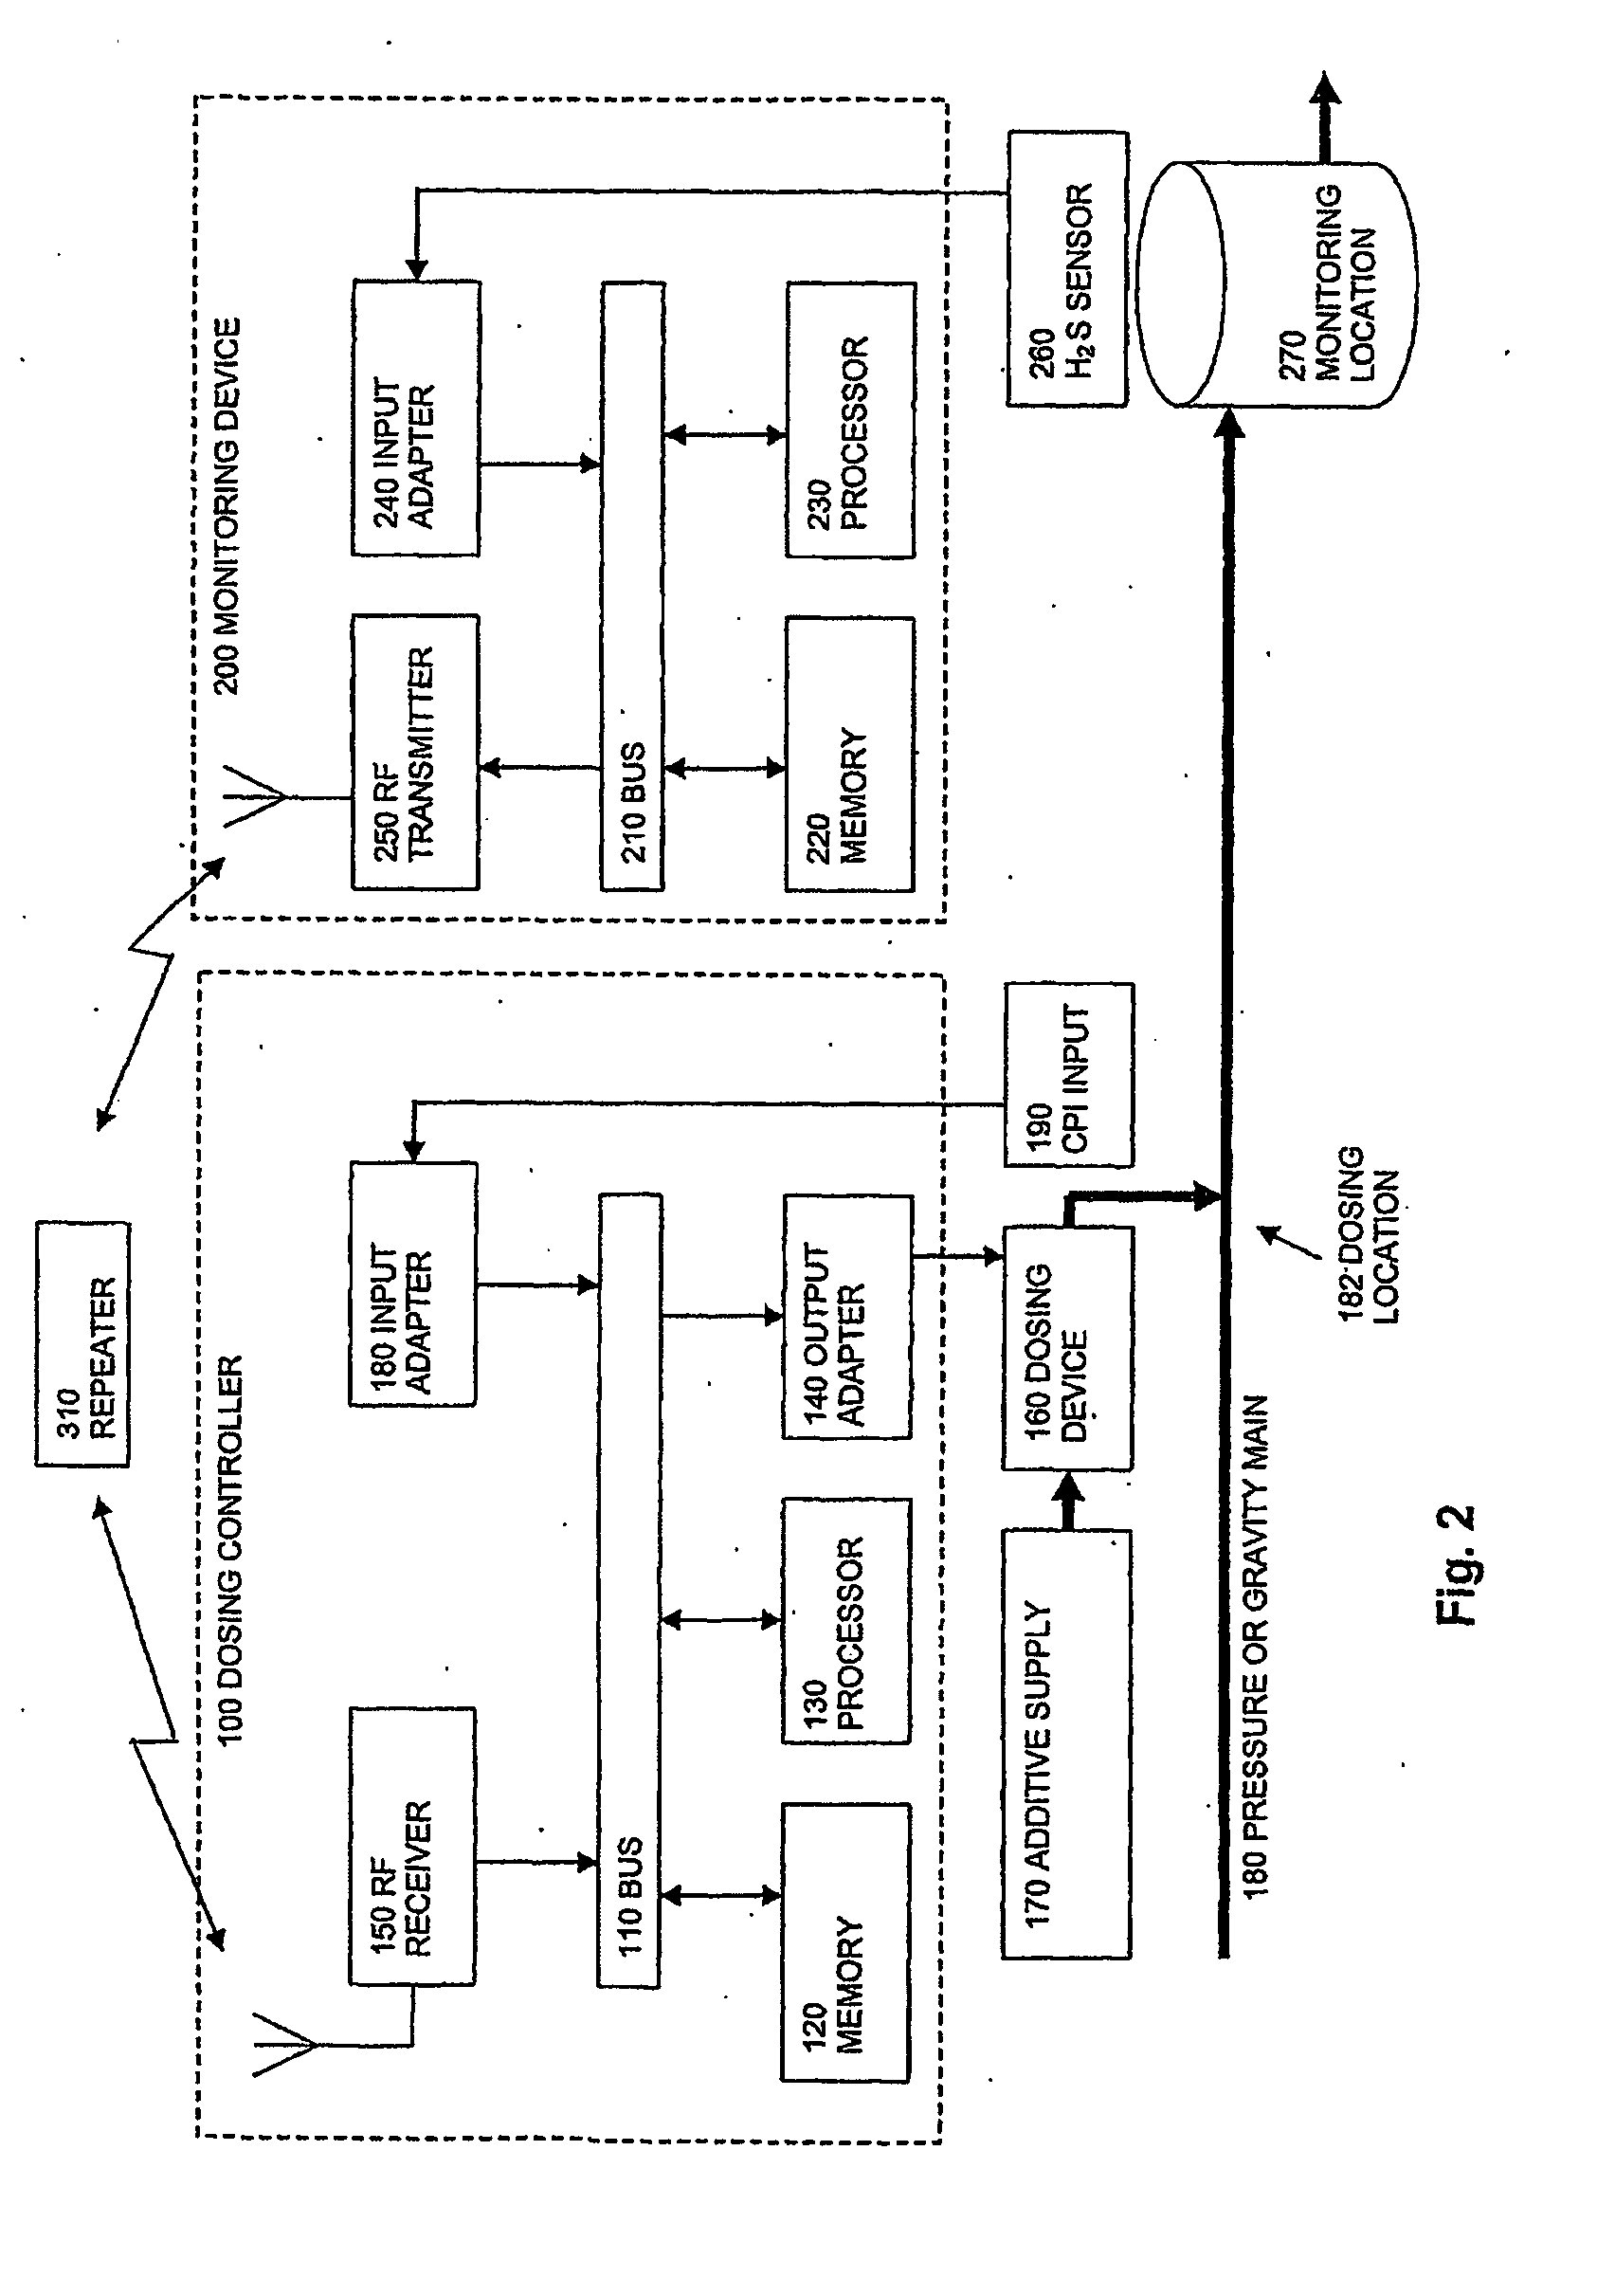 System for Controlling the Concentration of a Detrimental Substance in a Sewer Network